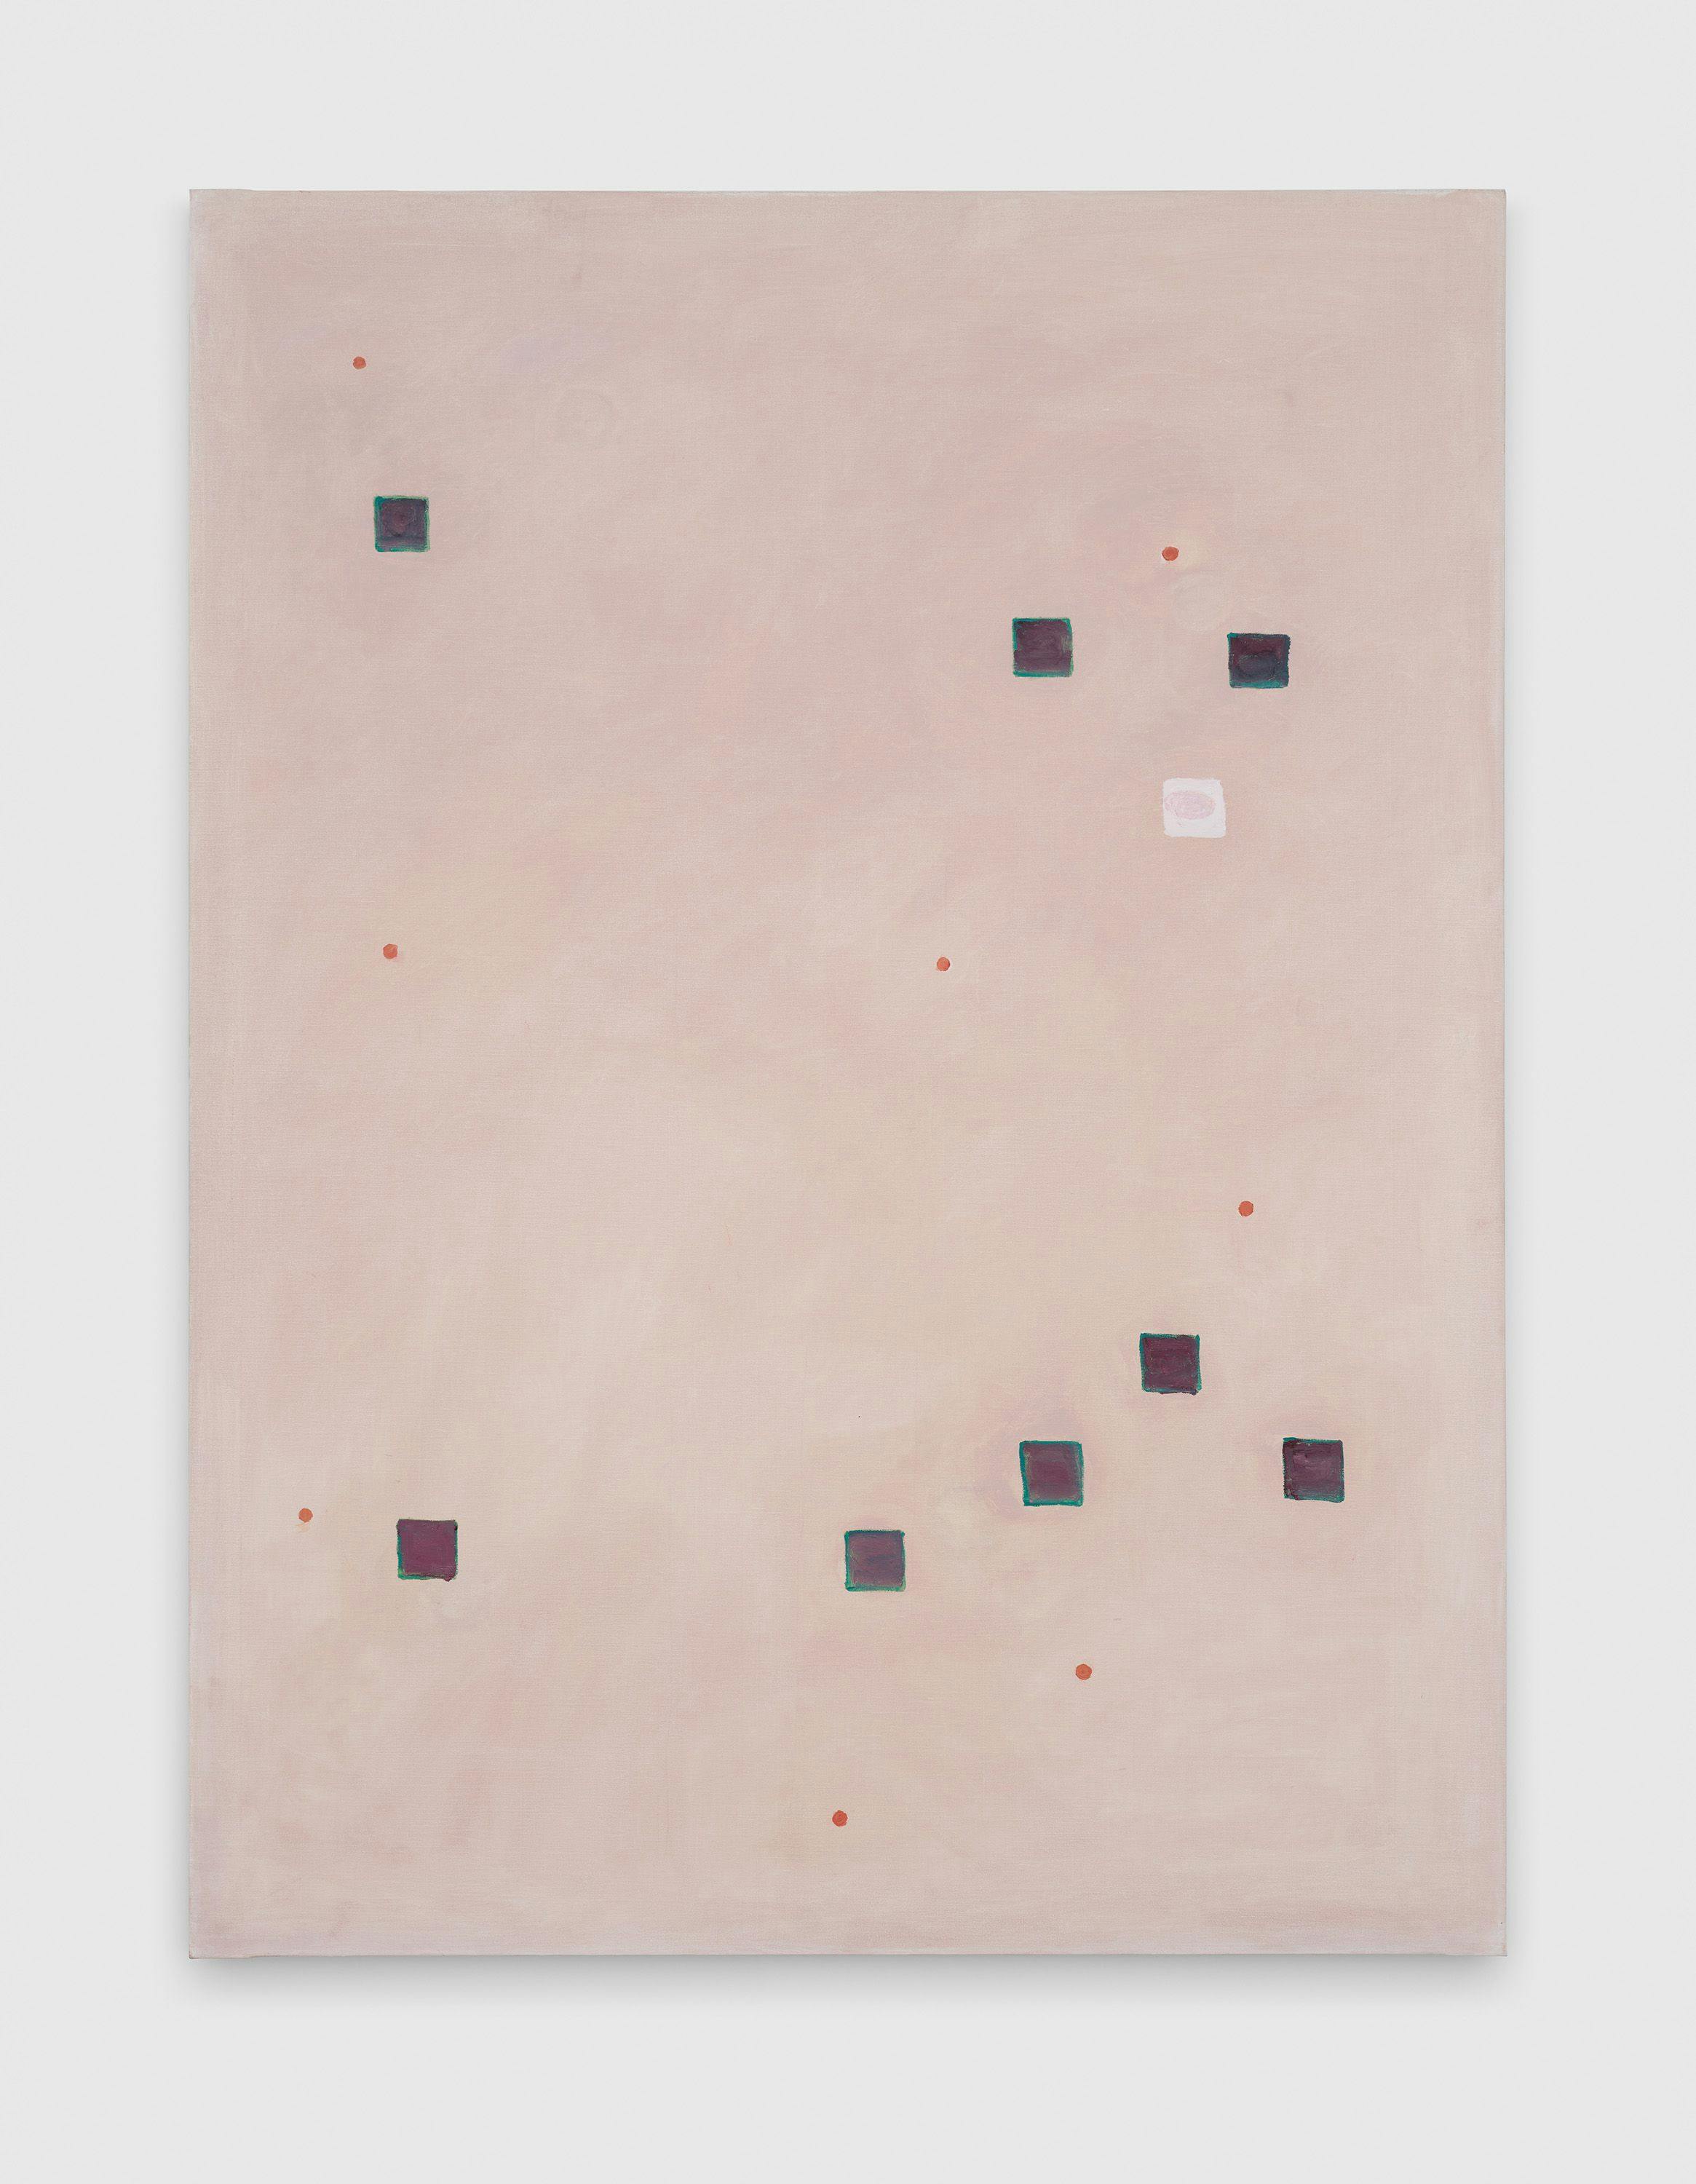 A painting by Raoul De Keyser, titled Come on, play it again nr. 5, dated 2001.